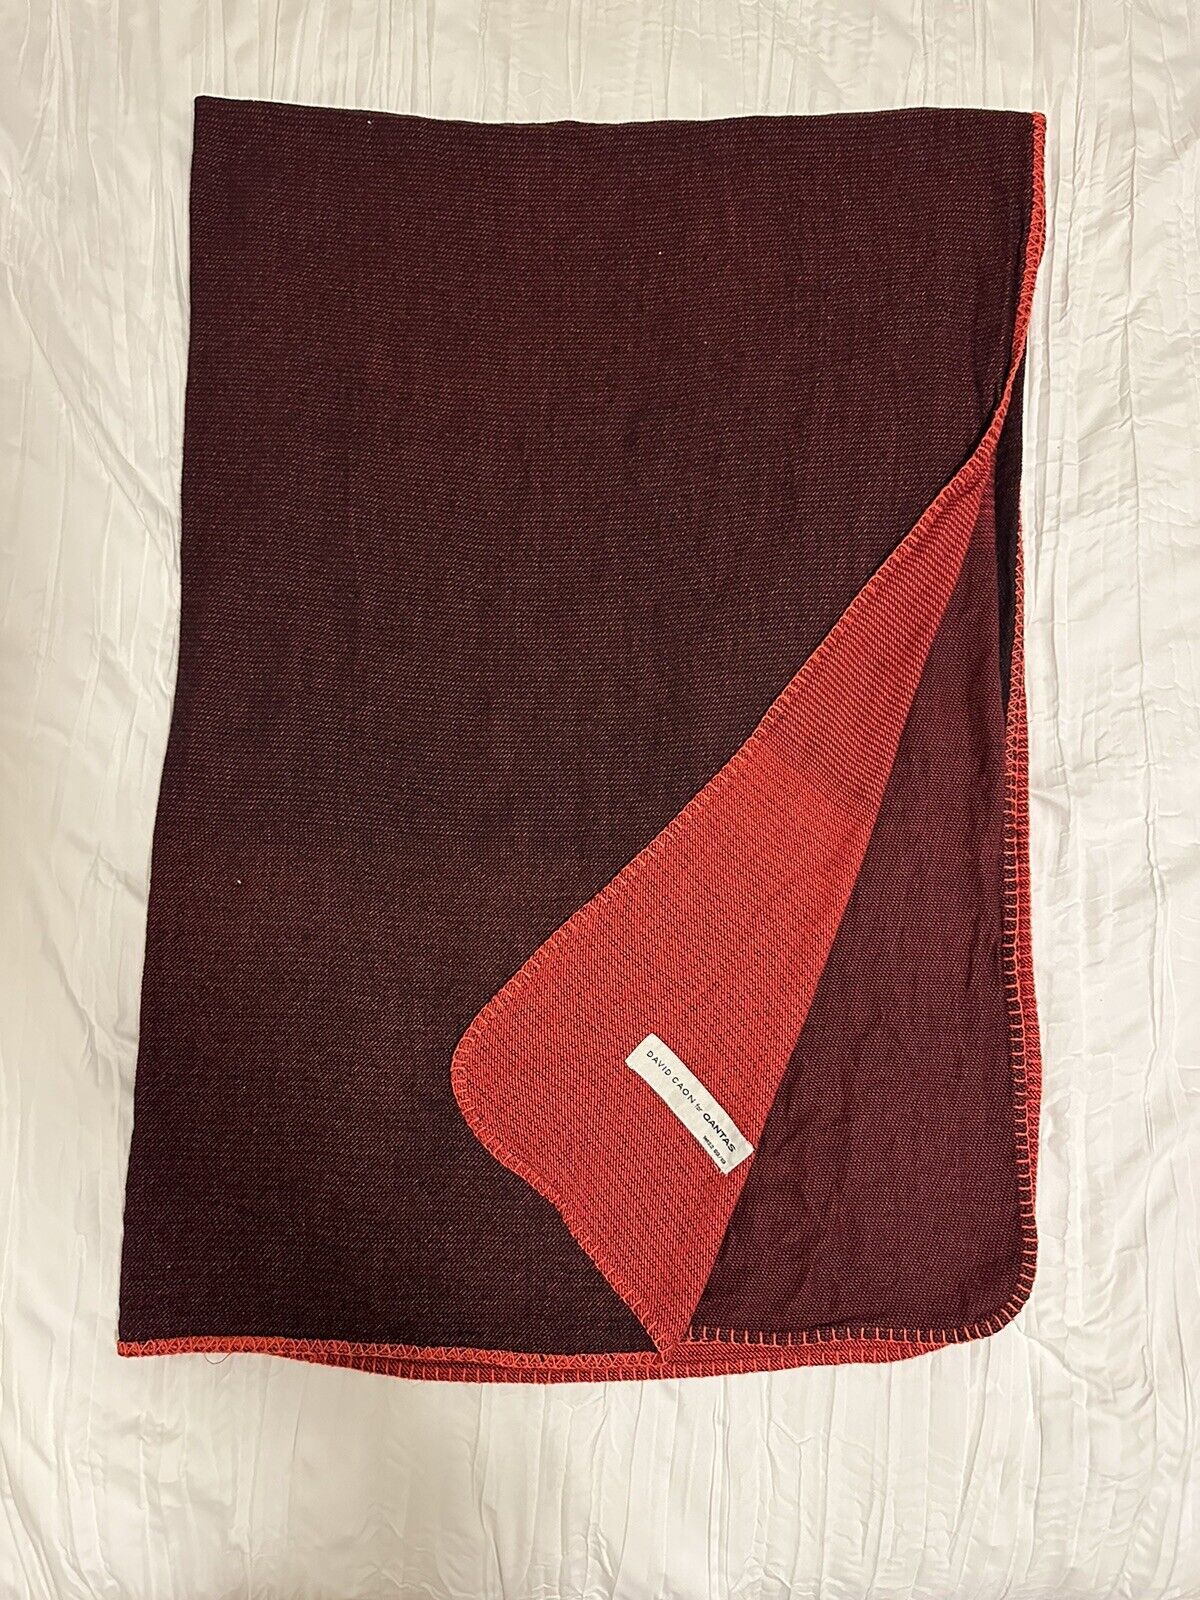 Collectable Qantas In-flight Blanket Red/Charcoal RARE By David Caon Design HTF